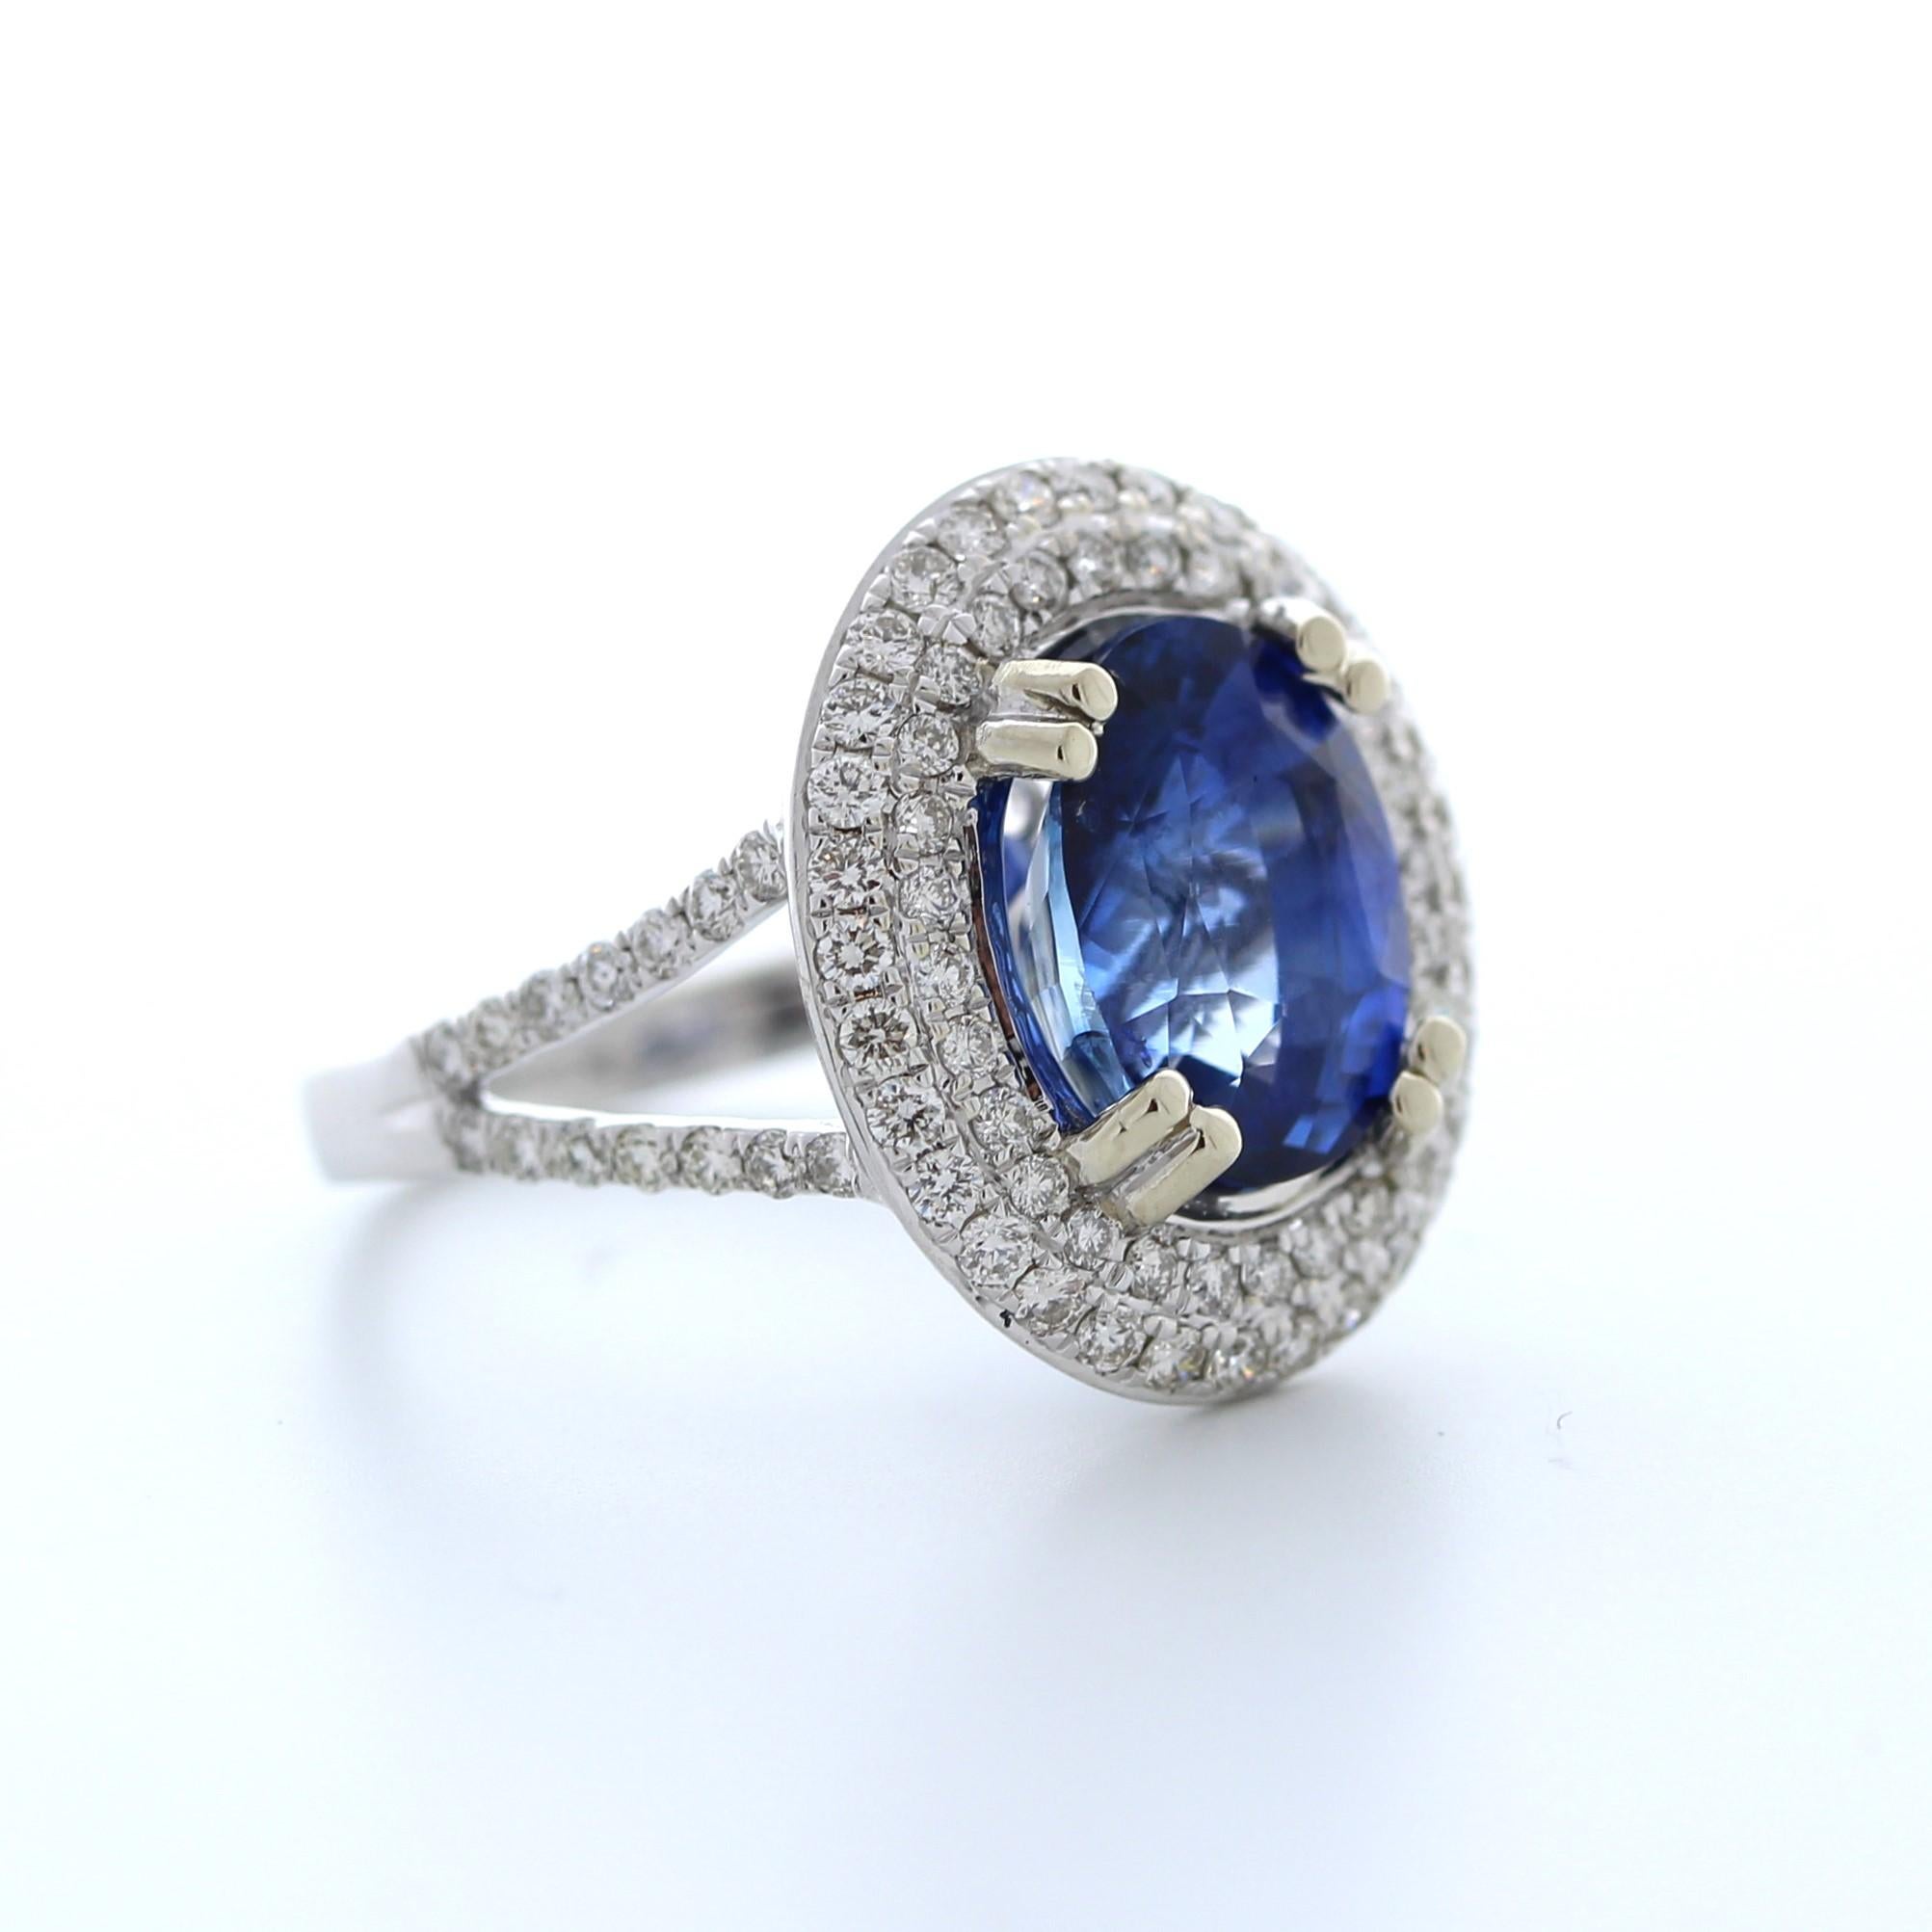 This magnificent 6.16 carat weight cornflower blue sapphire fashion ring is a breathtaking and bold choice for any occasion. The sapphire is a stunning shade of blue and boasts exceptional clarity and brilliance, weighing in at 6.16 carats. It is